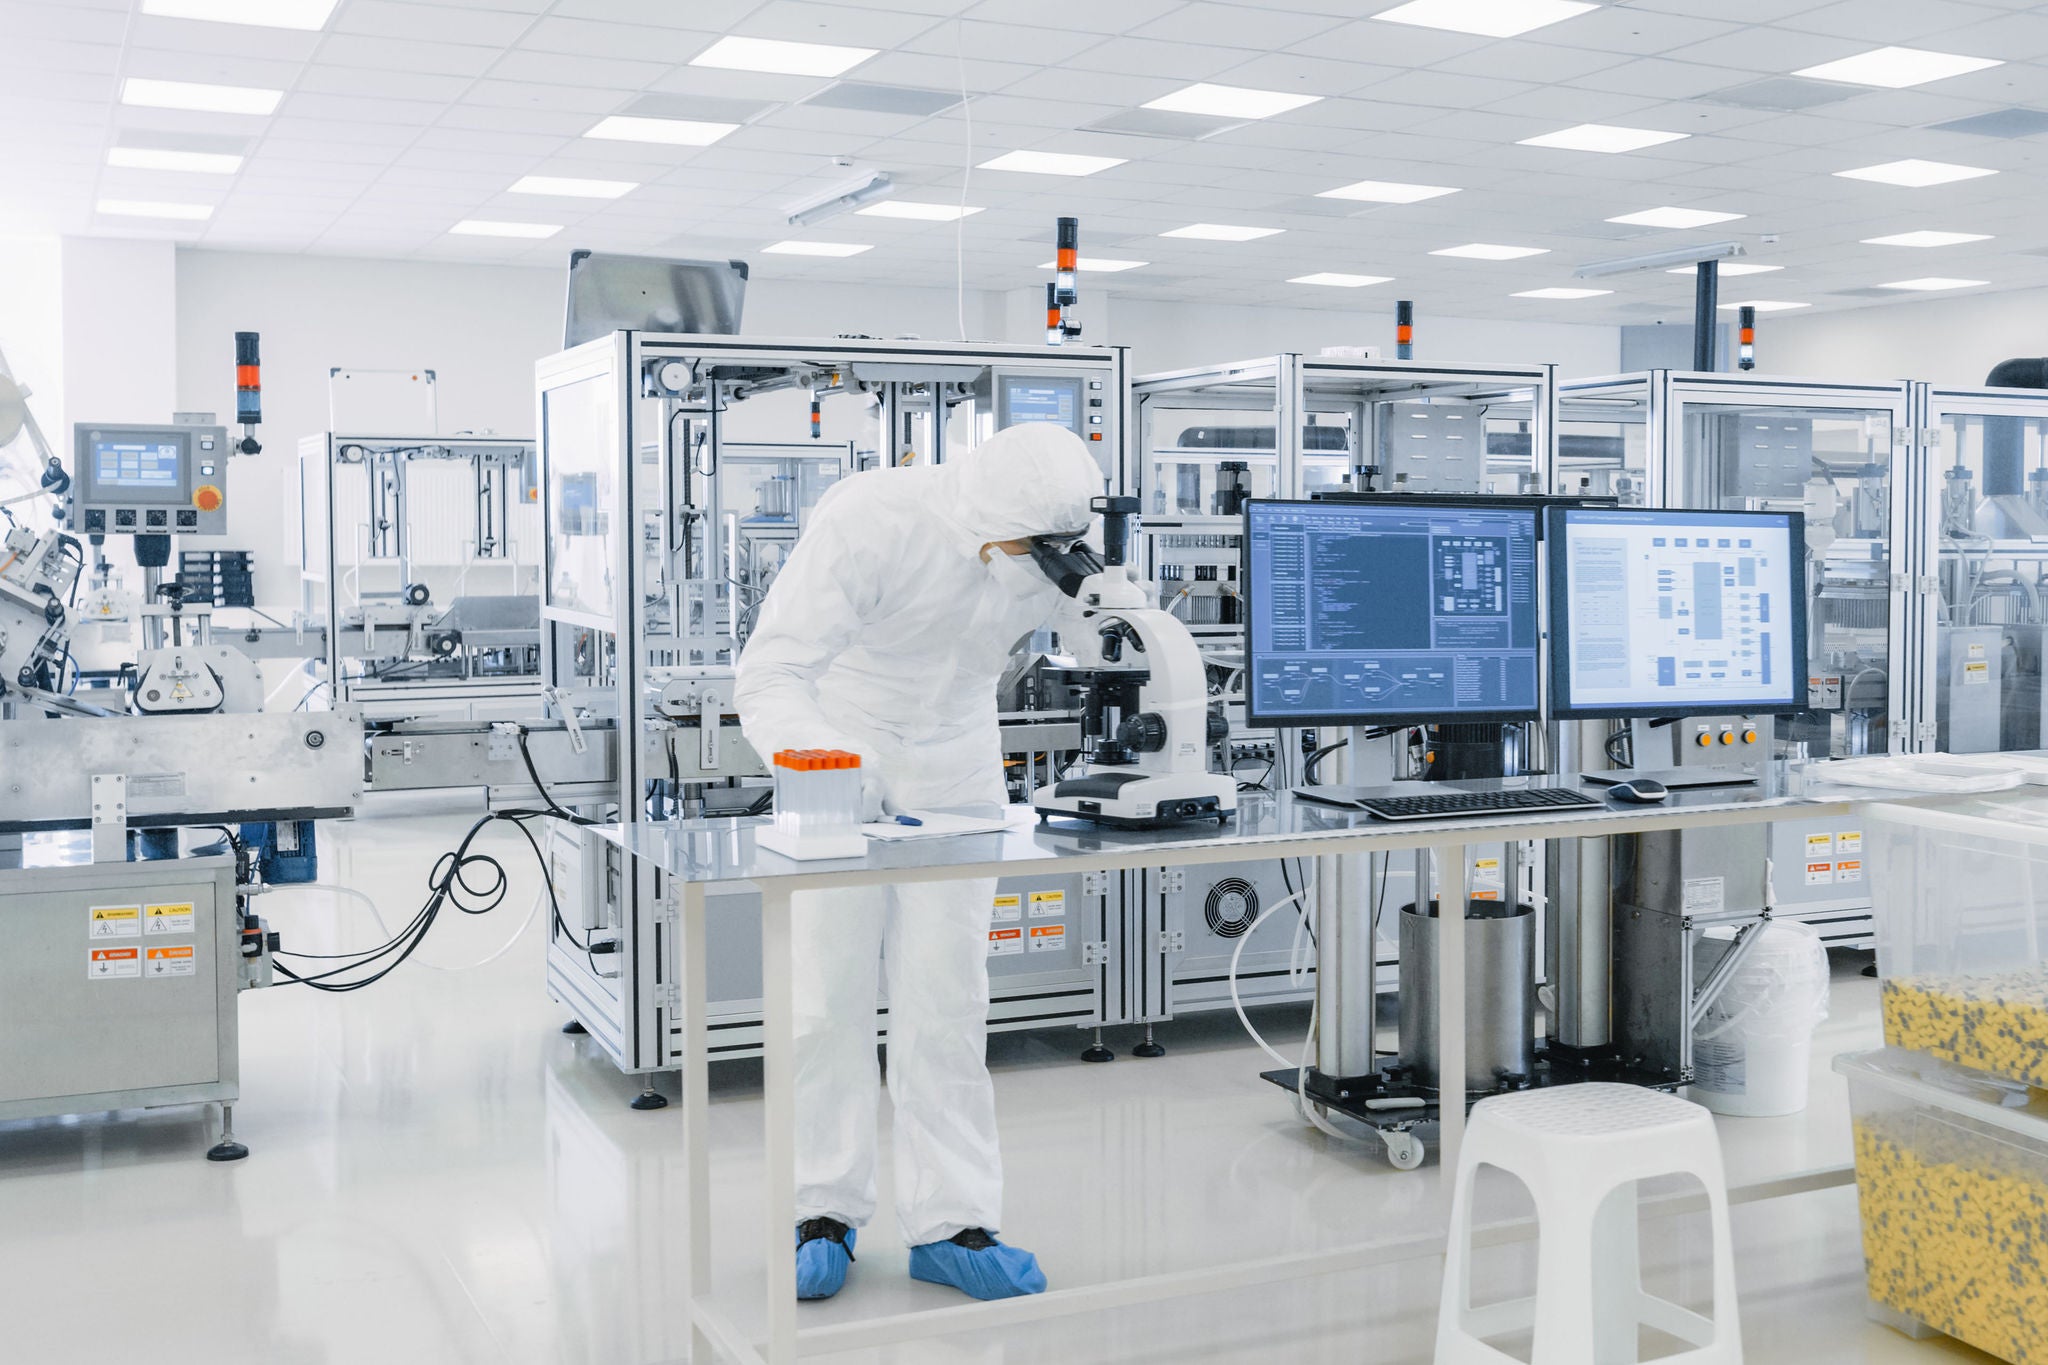 Shot of Sterile Pharmaceutical Manufacturing Laboratory where Scientists in Protective Coverall's Do Research, Quality Control and Work on the Discovery of new Medicine.; Shutterstock ID 1268263657; charge: 66184206; job: A4668 - Orifarm Case Study; name: Charles Brewer; email: charles.brewer@uk.ey.com